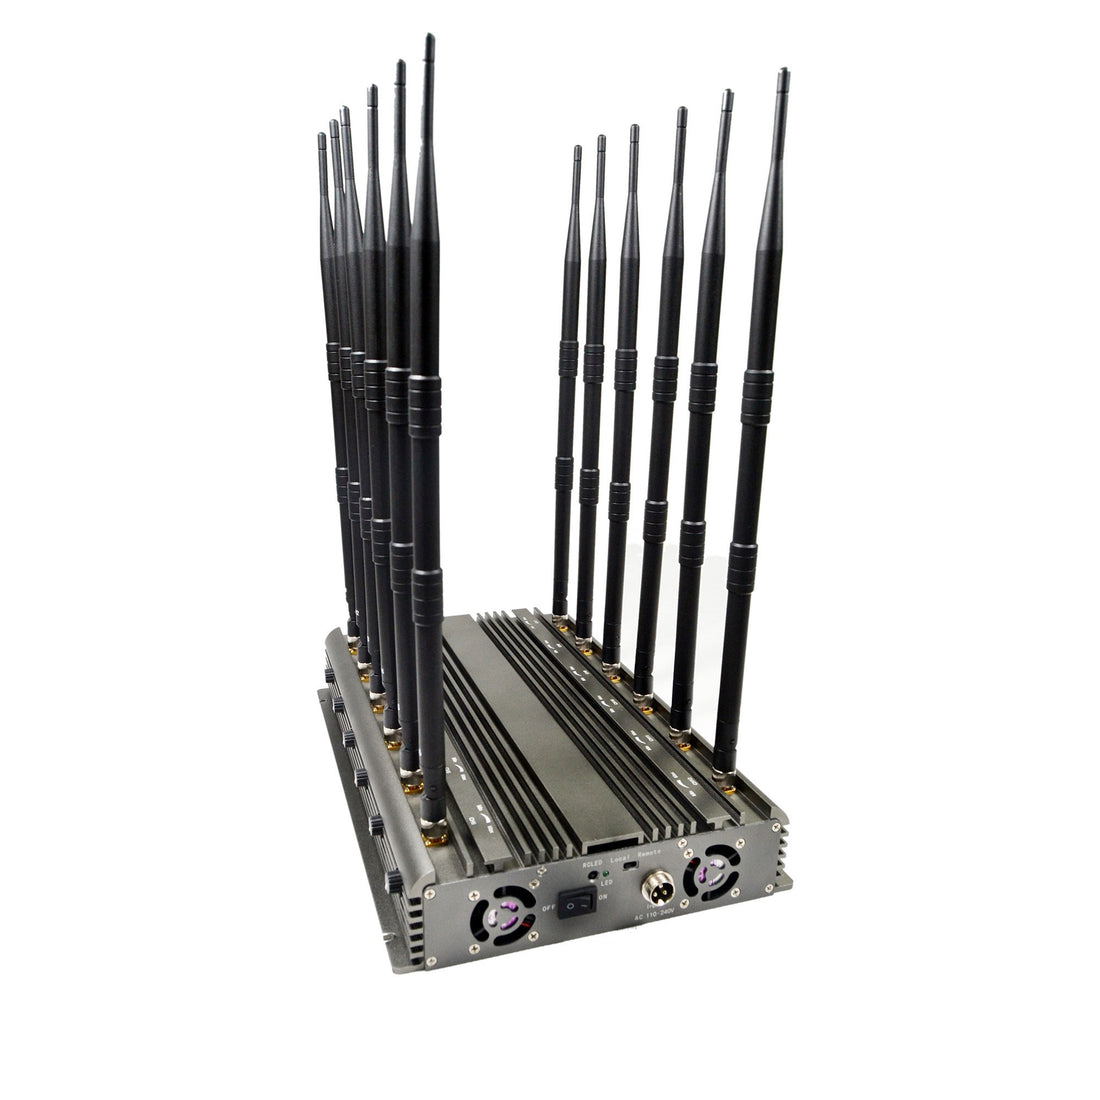 How to extend the life of cell phone signal jammer? Maintenance is essential